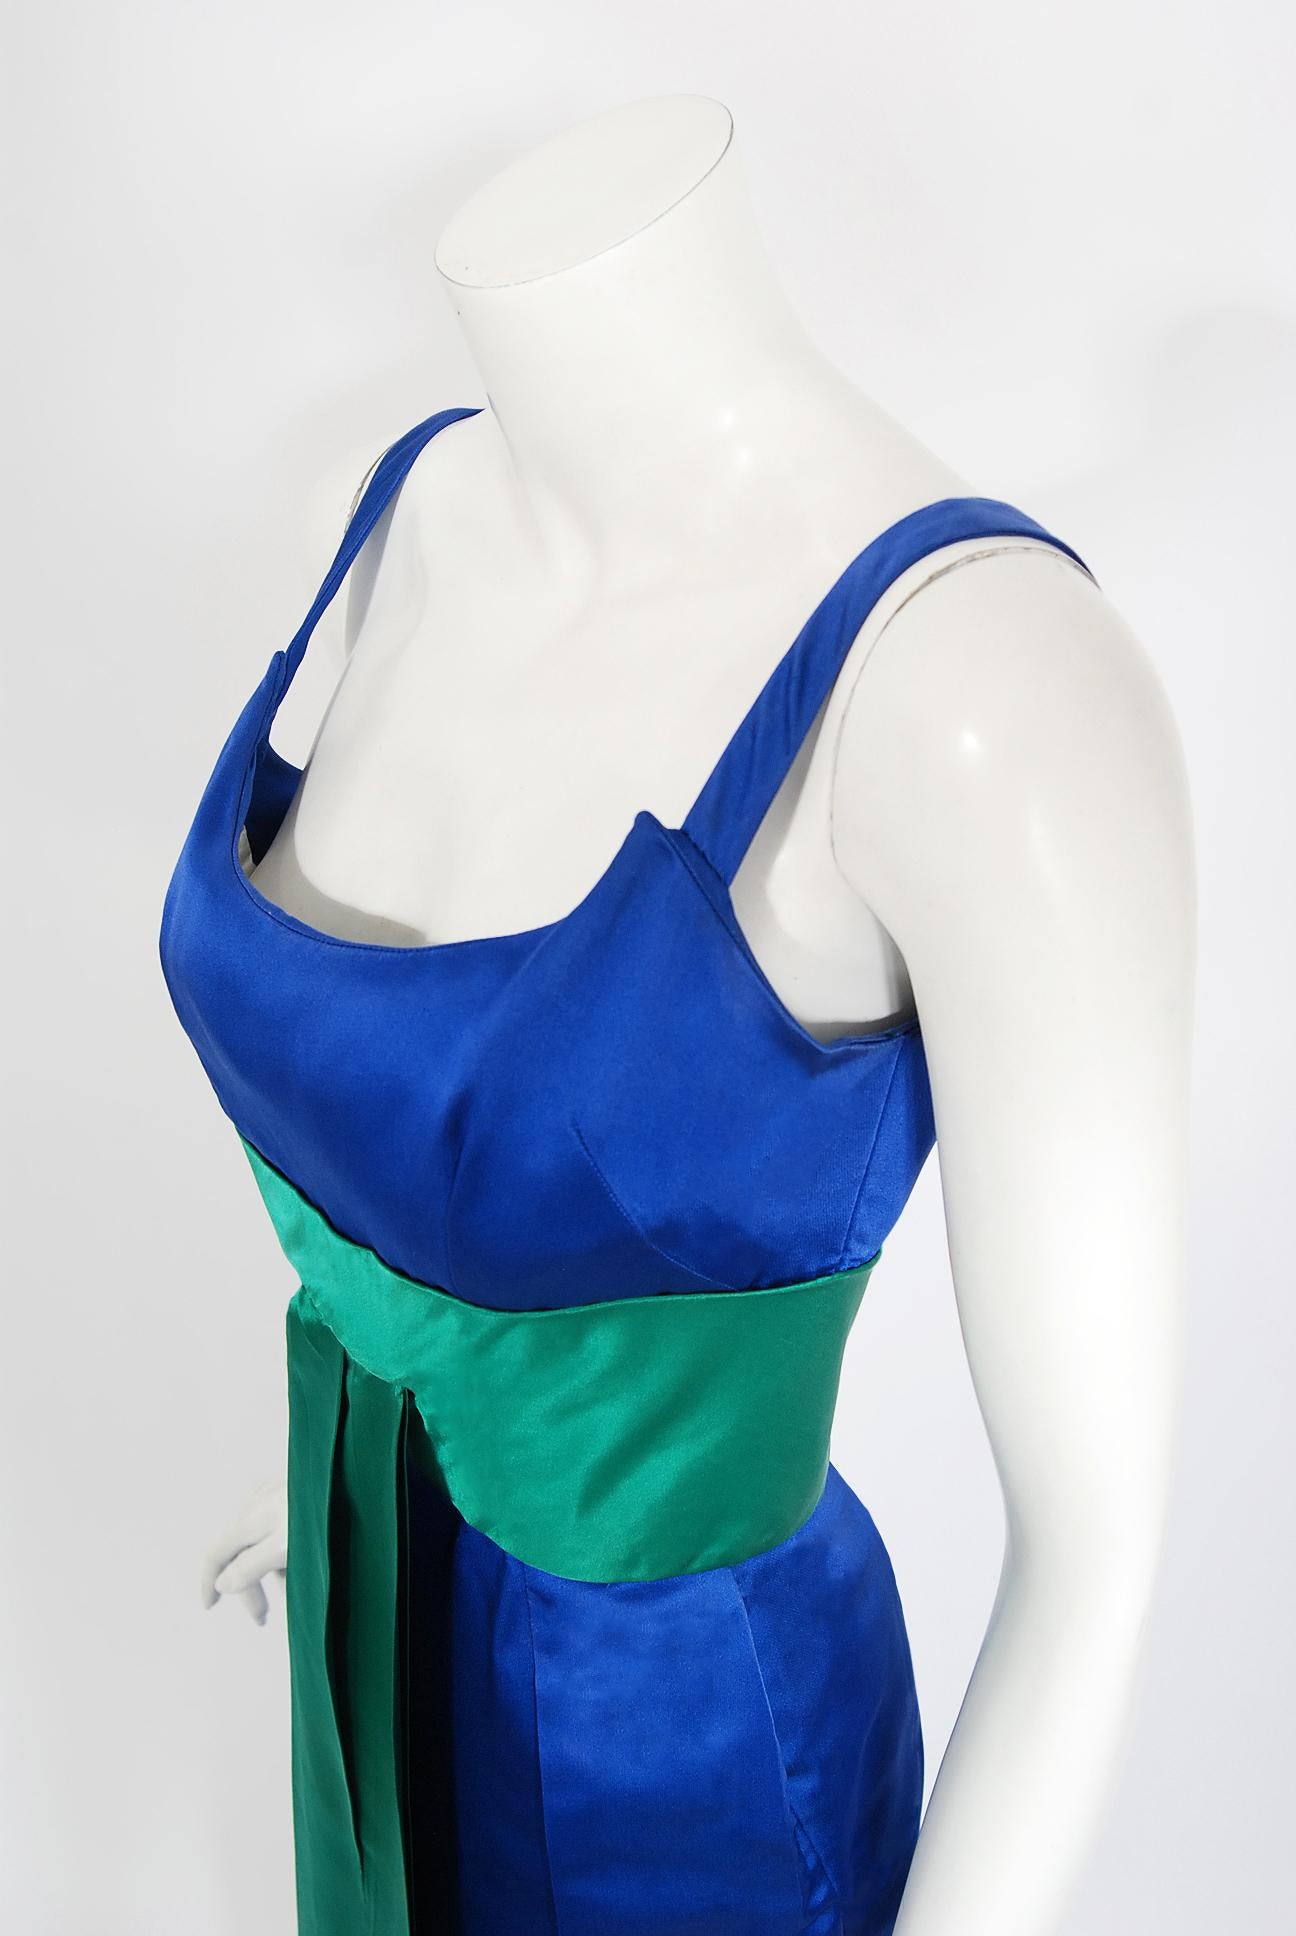 Women's Vintage 1950s Oleg Cassini Sapphire Blue & Green Silk Sash Hourglass Fitted Gown